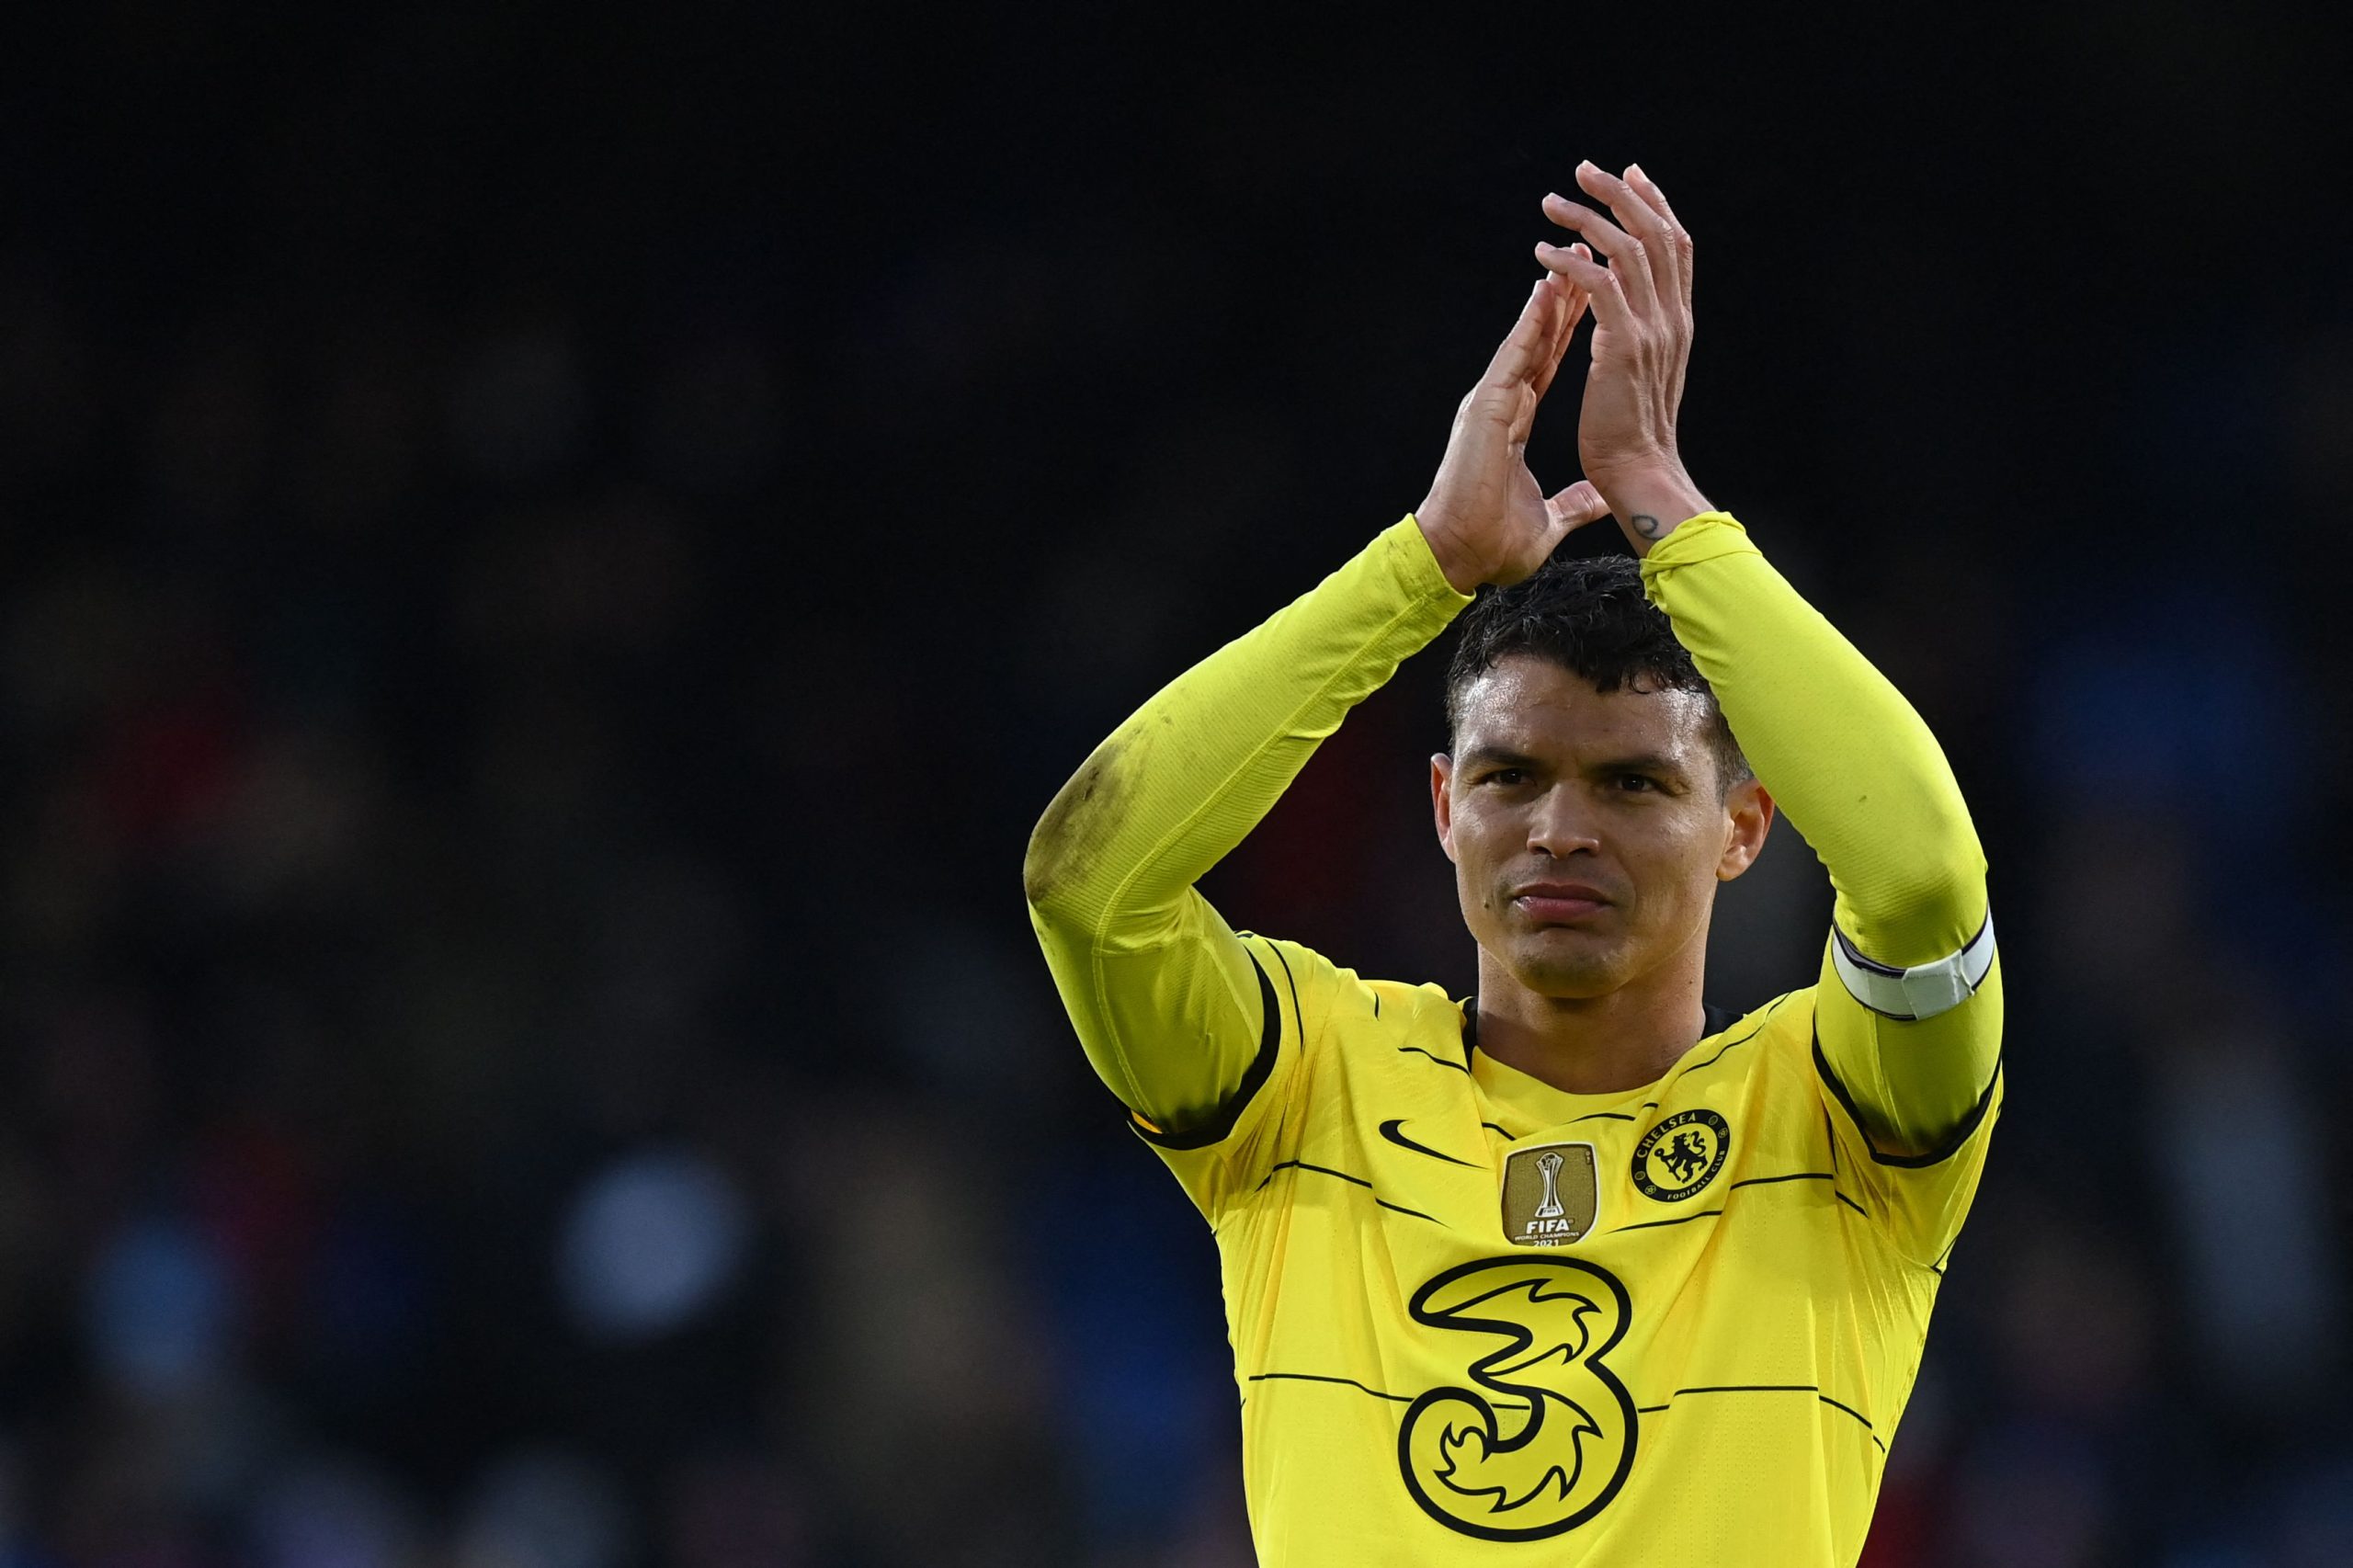 Dermot Gallagher: It was the correct decision to not send off Chelsea star Thiago Silva vs Crystal Palace.